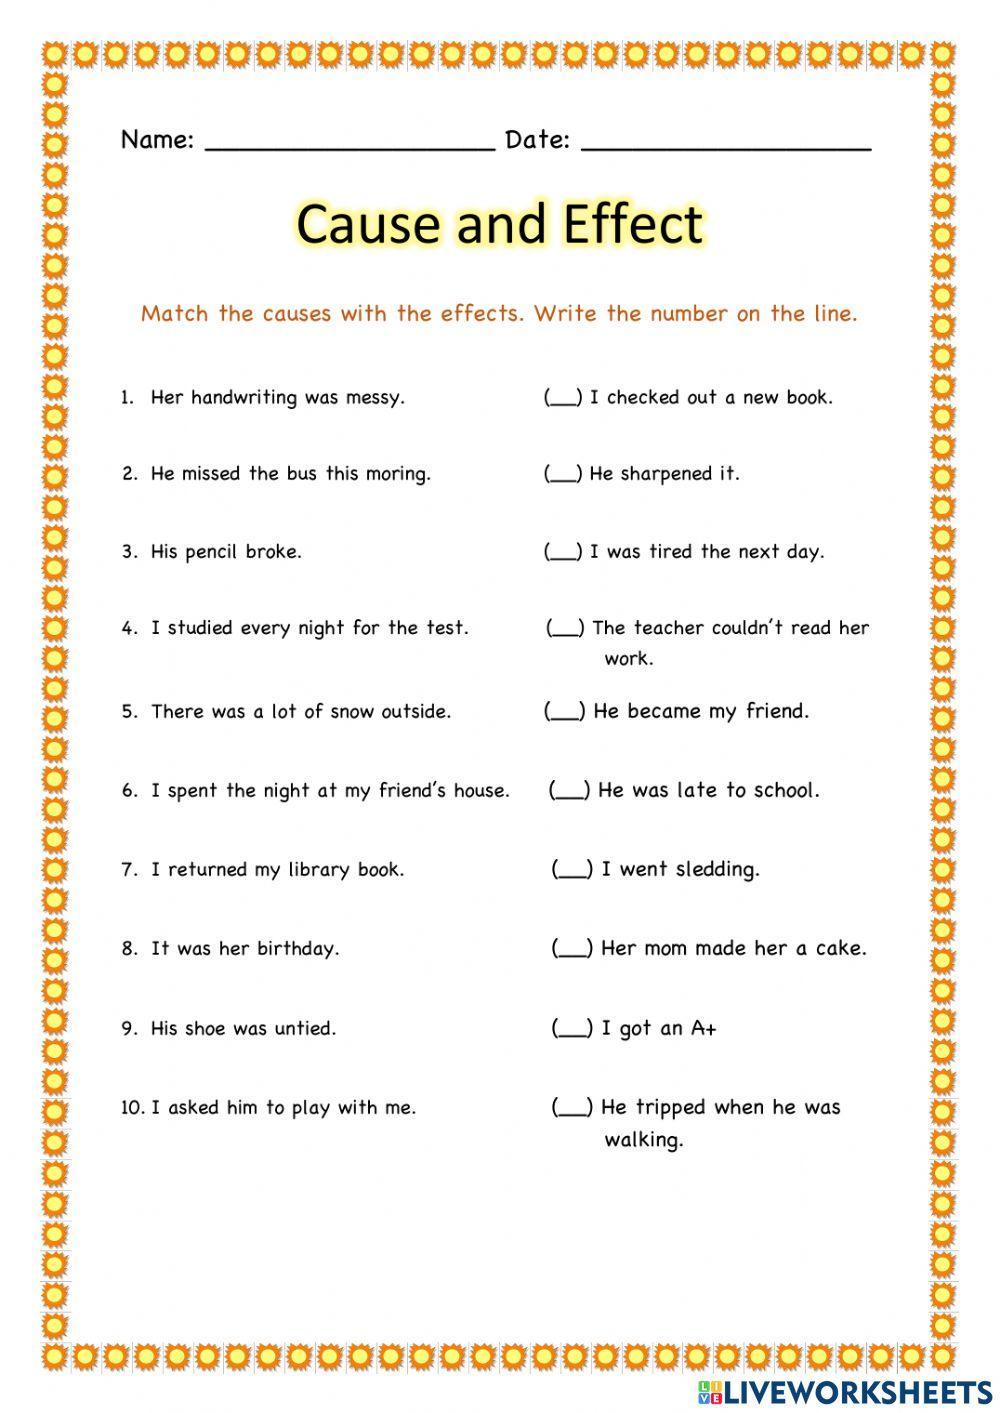 cause and effect essay liveworksheets